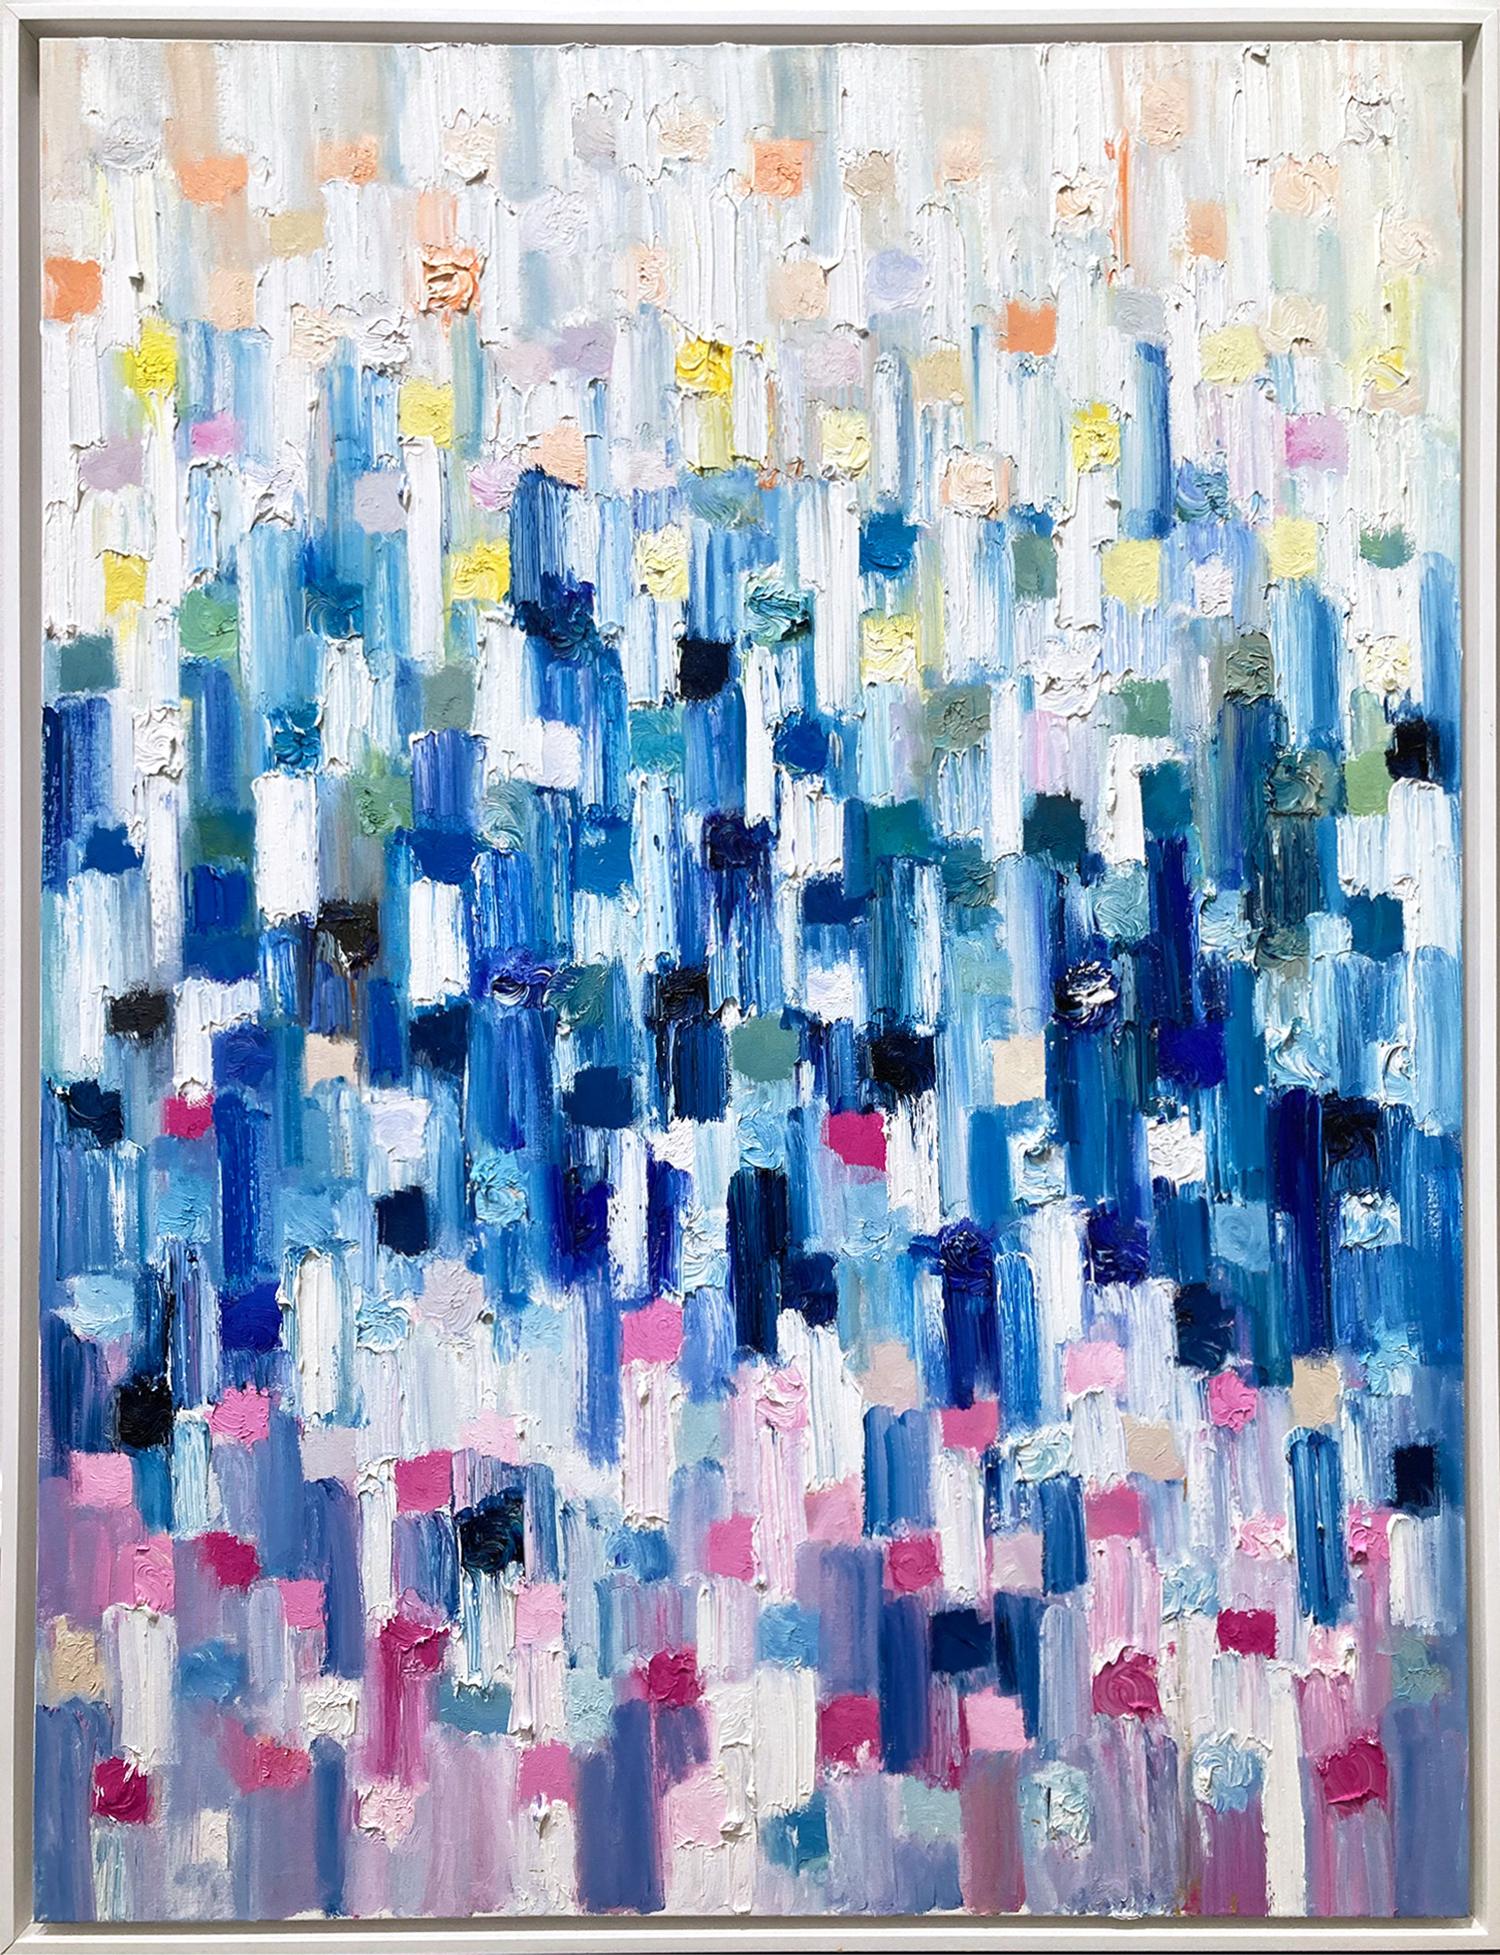 Cindy Shaoul Abstract Painting - "Dripping Dots - Savanah" Multicolor Contemporary Oil Painting on Canvas